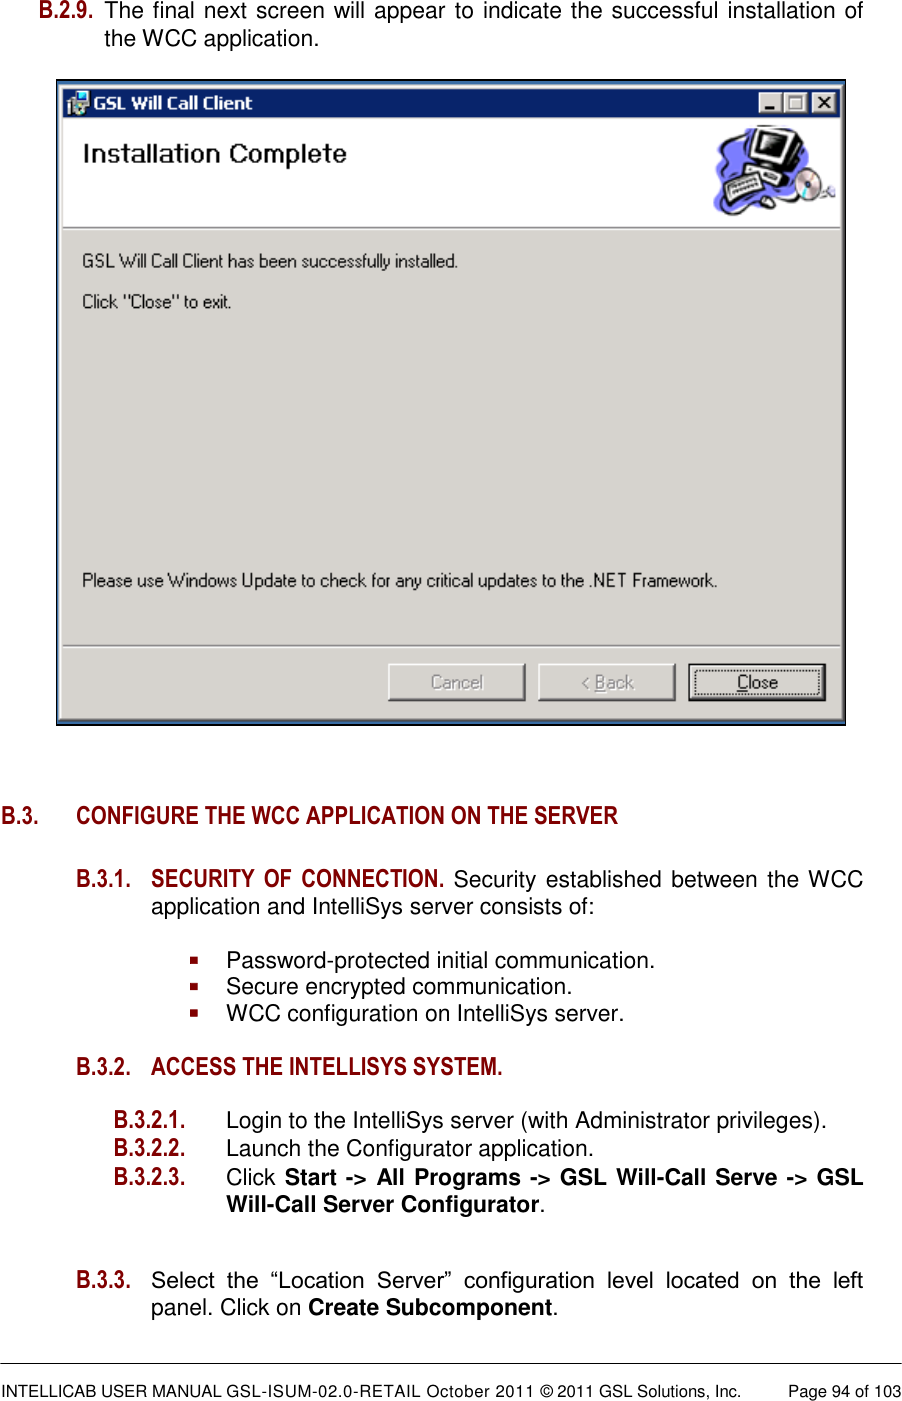  INTELLICAB USER MANUAL GSL-ISUM-02.0-RETAIL October 2011 © 2011 GSL Solutions, Inc.   Page 94 of 103   B.2.9.  The final next screen will appear to indicate the successful installation of the WCC application.              B.3.  CONFIGURE THE WCC APPLICATION ON THE SERVER  B.3.1. SECURITY  OF  CONNECTION. Security established between the WCC application and IntelliSys server consists of:   Password-protected initial communication.  Secure encrypted communication.  WCC configuration on IntelliSys server.  B.3.2.  ACCESS THE INTELLISYS SYSTEM.  B.3.2.1.   Login to the IntelliSys server (with Administrator privileges). B.3.2.2.   Launch the Configurator application. B.3.2.3. Click Start -&gt; All Programs -&gt; GSL Will-Call Serve -&gt; GSL Will-Call Server Configurator.   B.3.3. Select  the  “Location  Server”  configuration  level  located  on  the  left panel. Click on Create Subcomponent. 